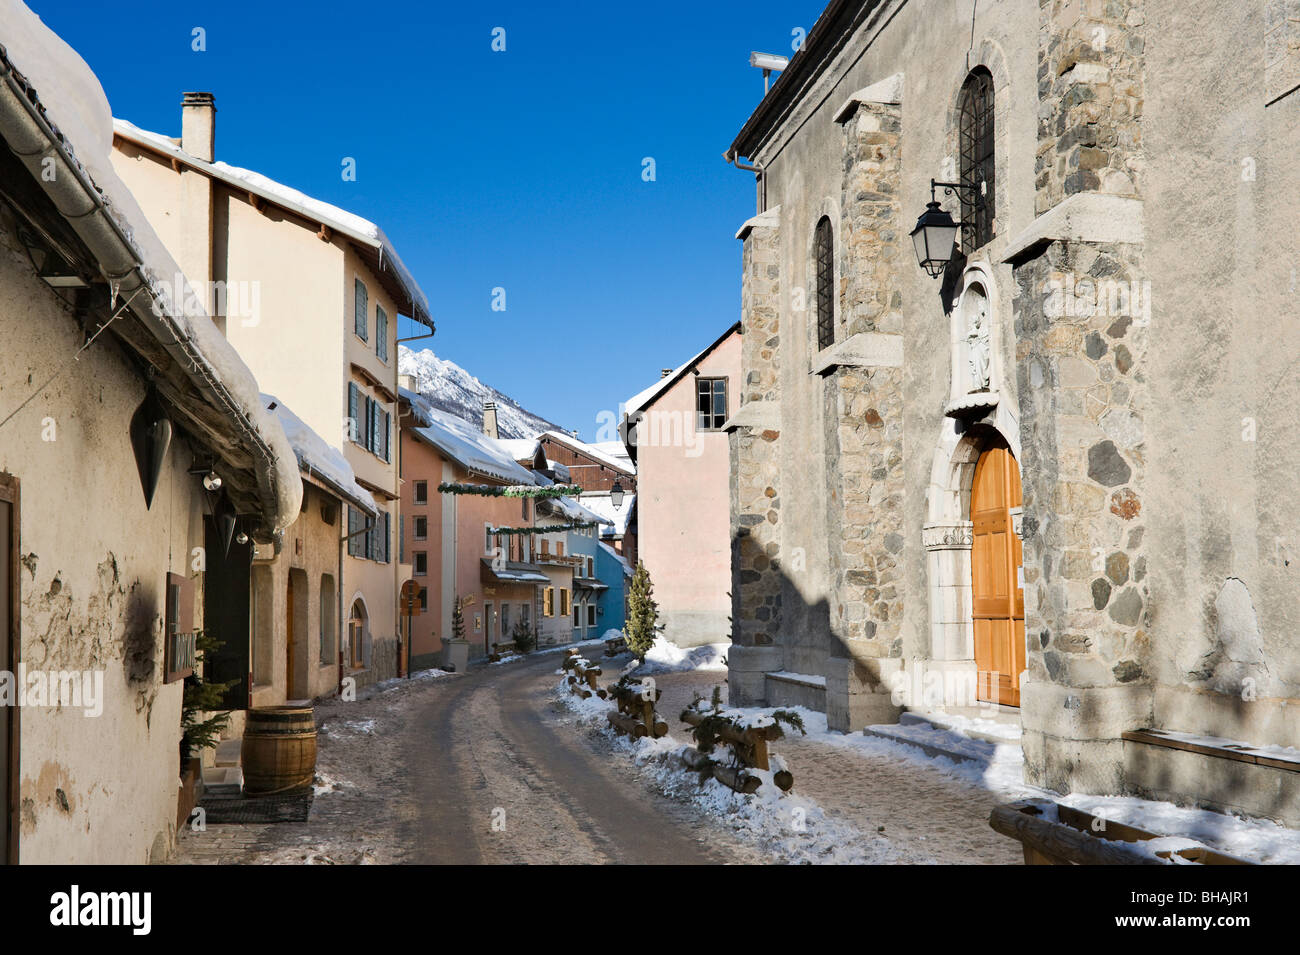 Street in the centre of the village of Chantemerle, Serre Chevalier, Hautes Alpes, France Stock Photo